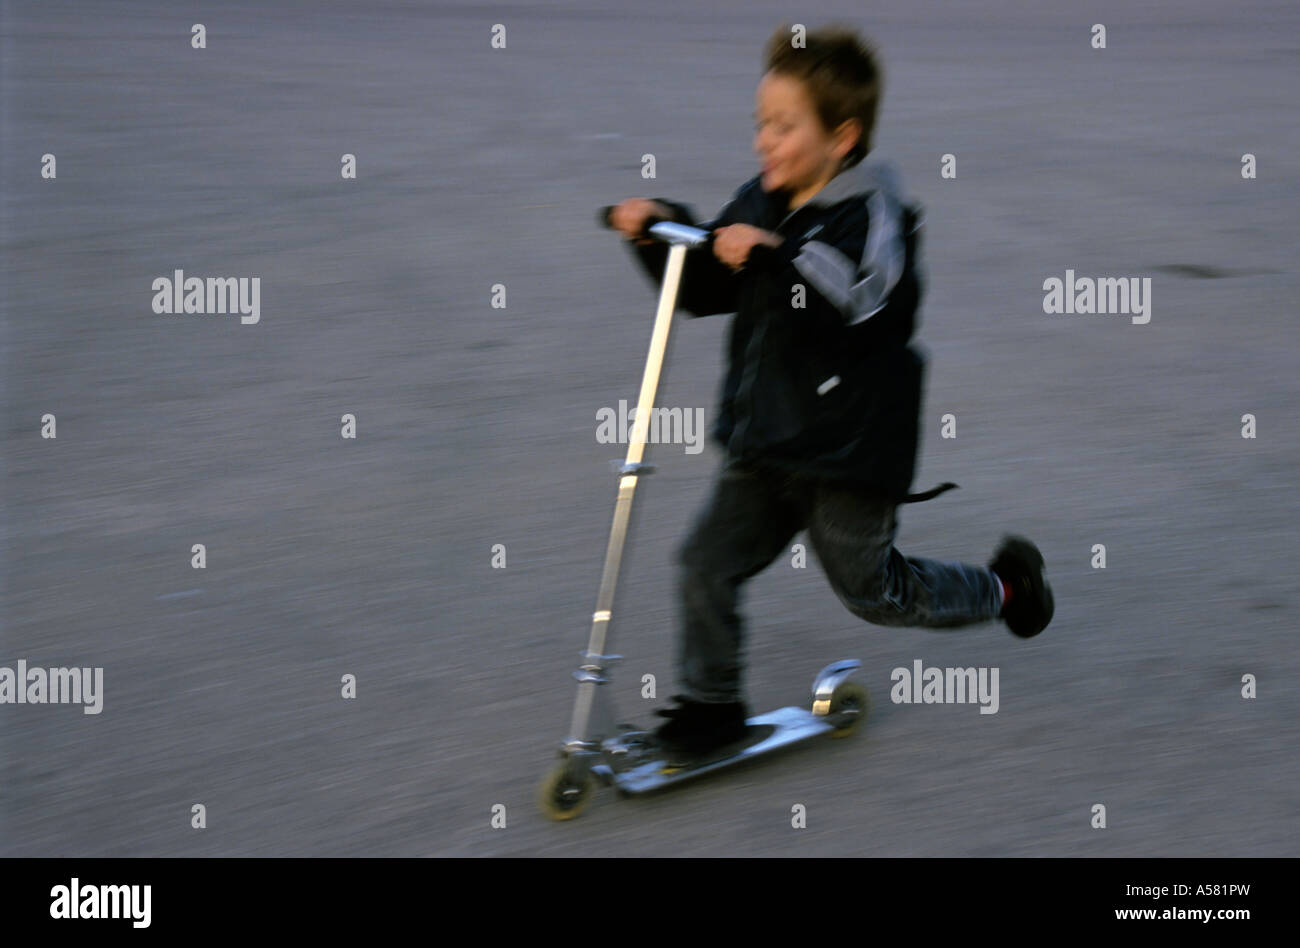 Young boy speeding on a kick scooter. Stock Photo